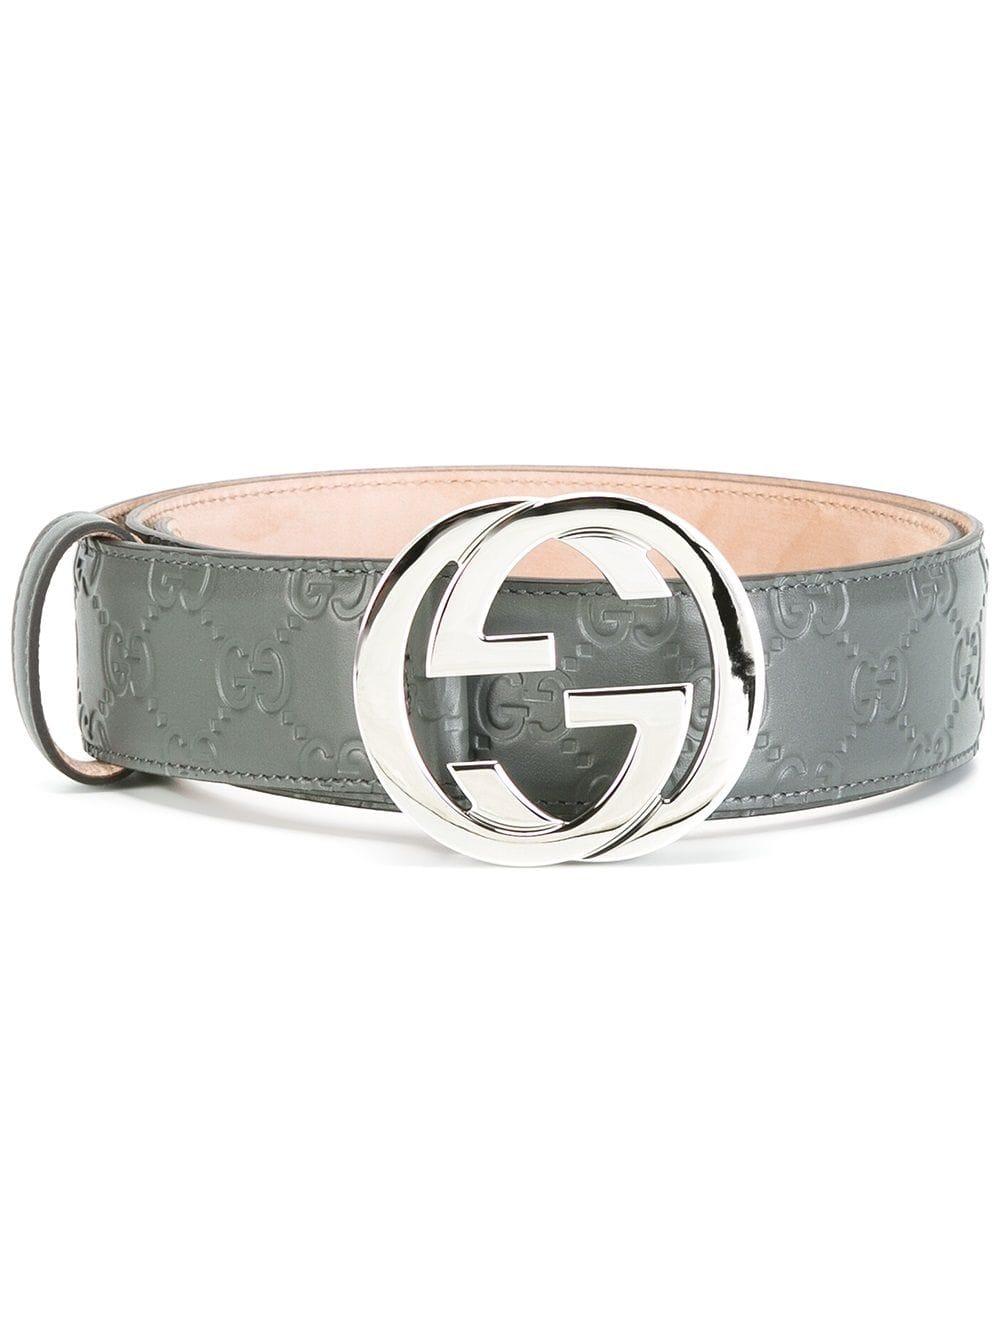 Gucci GG Supreme Belt in Gray for Men - Lyst